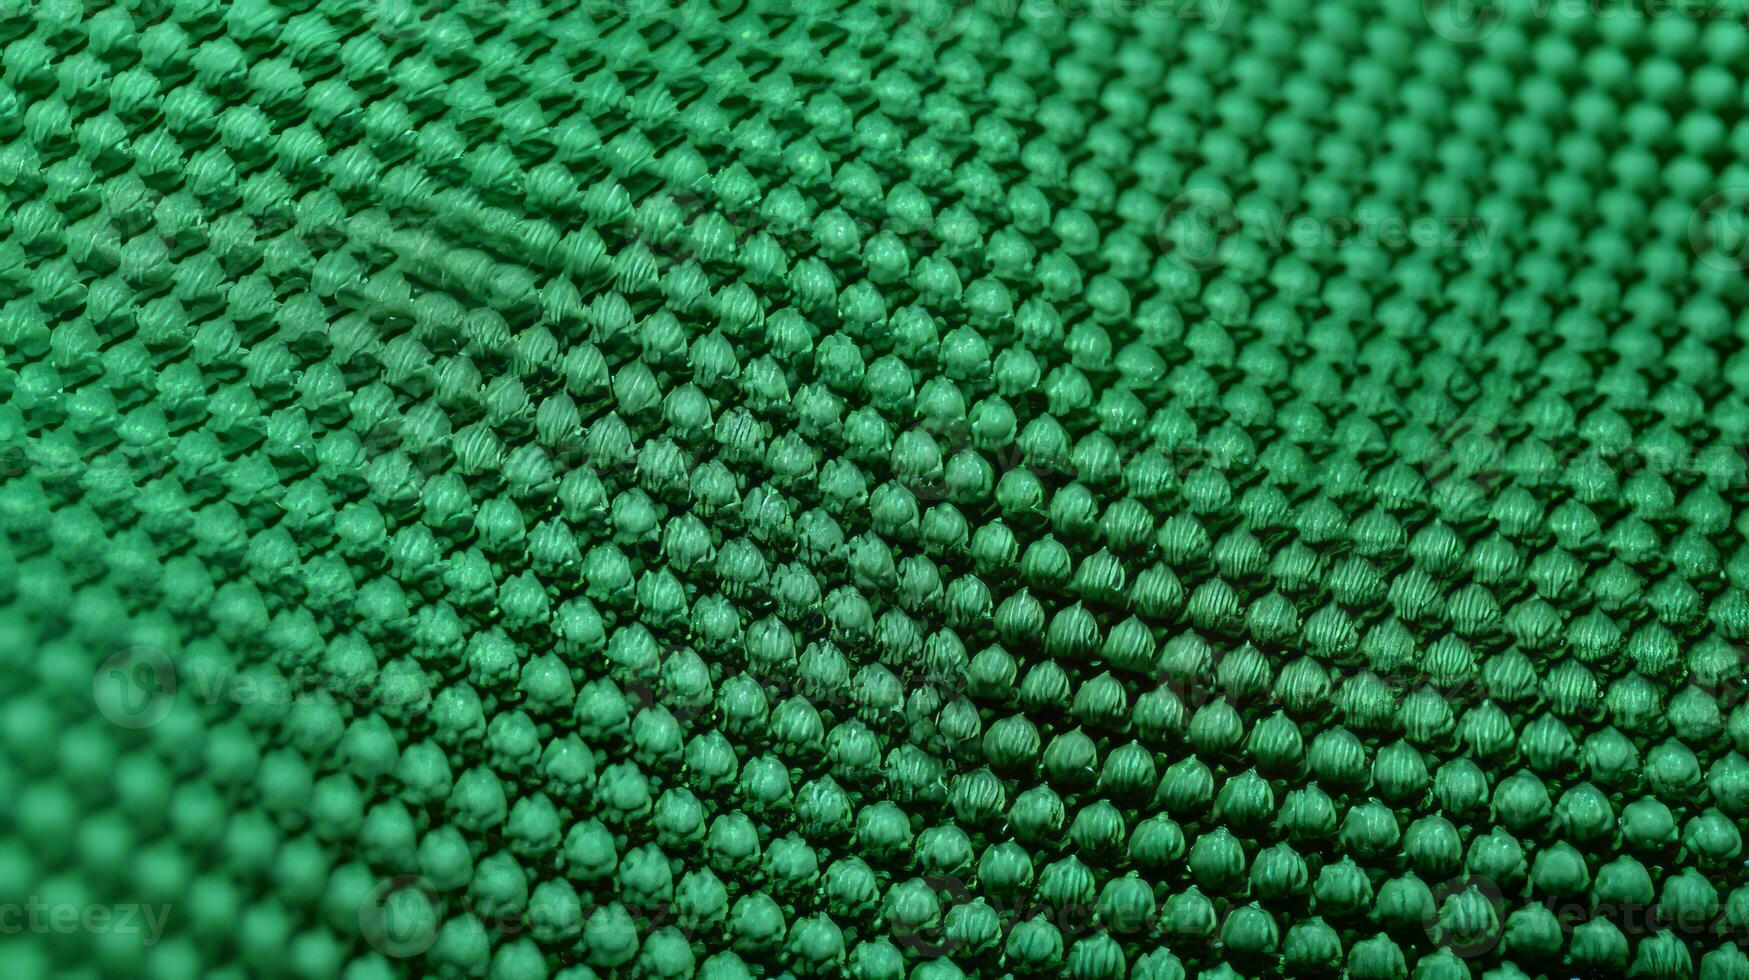 Green soccer fabric texture with air mesh. Athletic wear backdrop photo